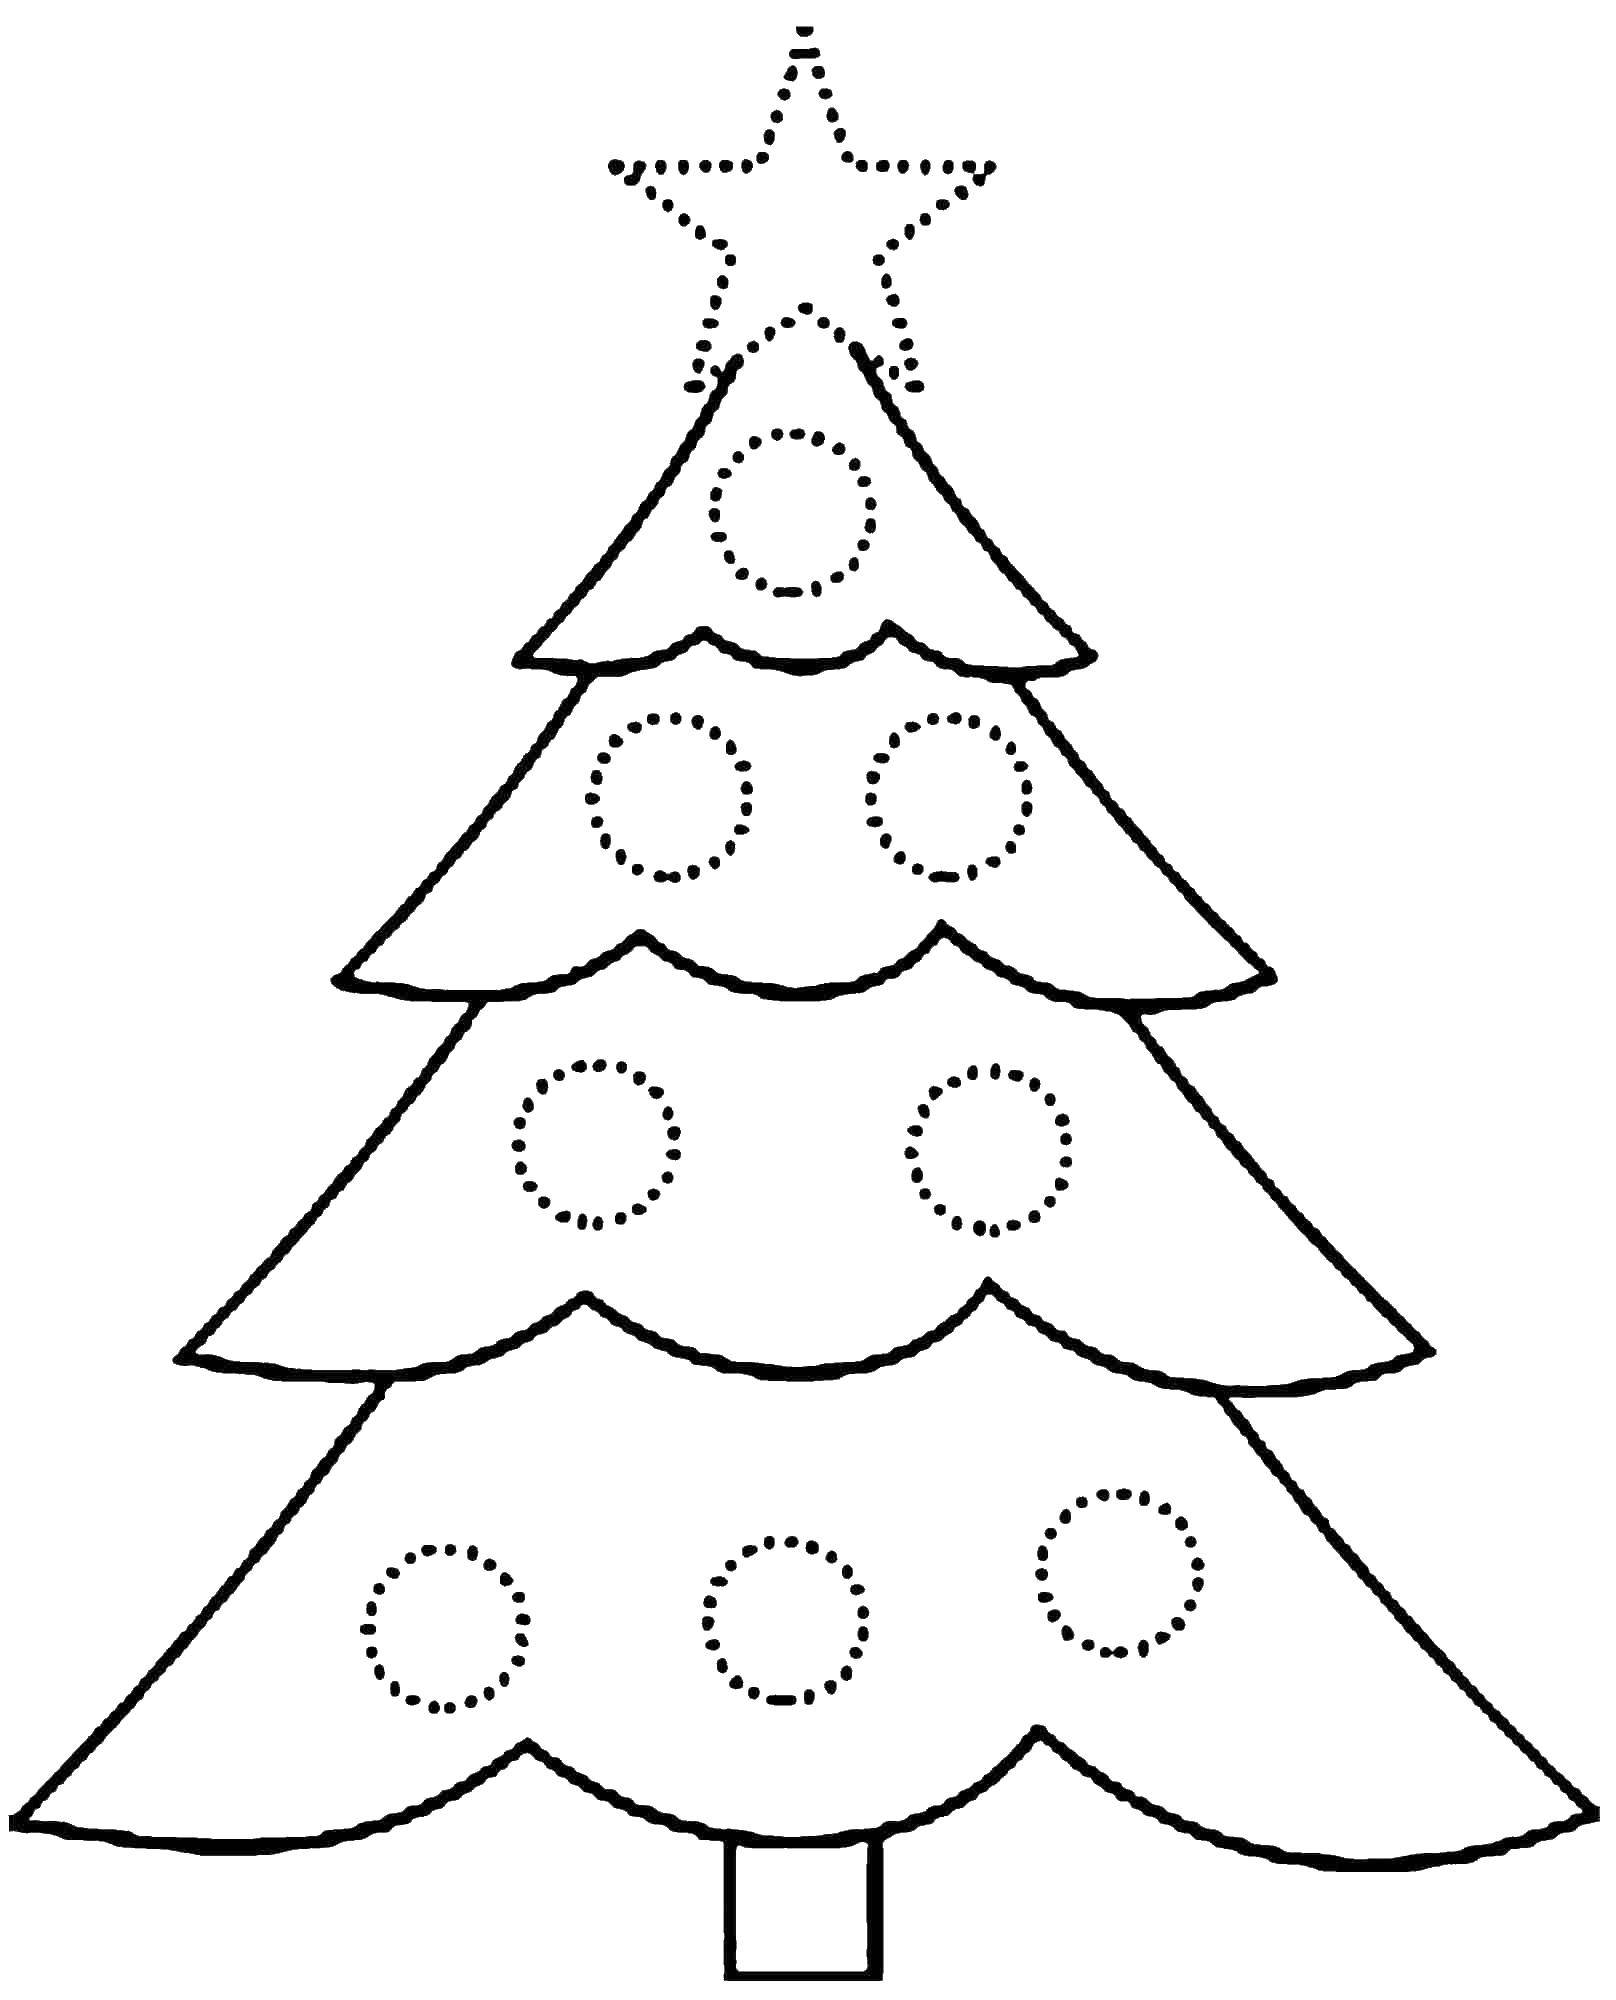 Coloring Trace the contour and color. Category Christmas. Tags:  Pattern , stroke path.